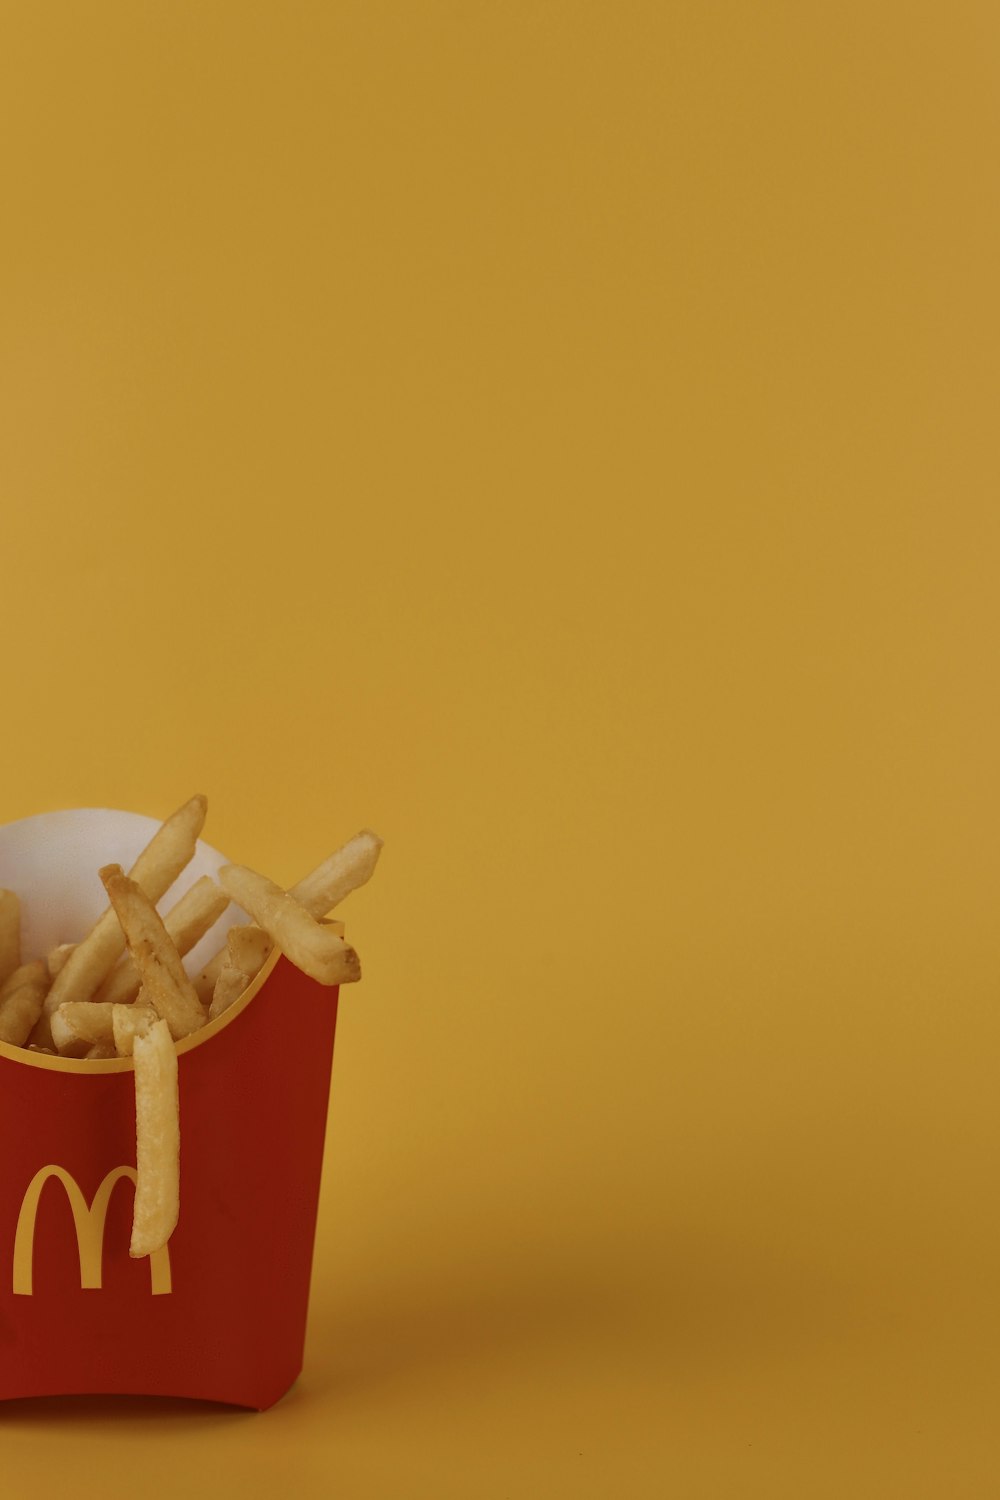 french fries in a red box on a yellow background